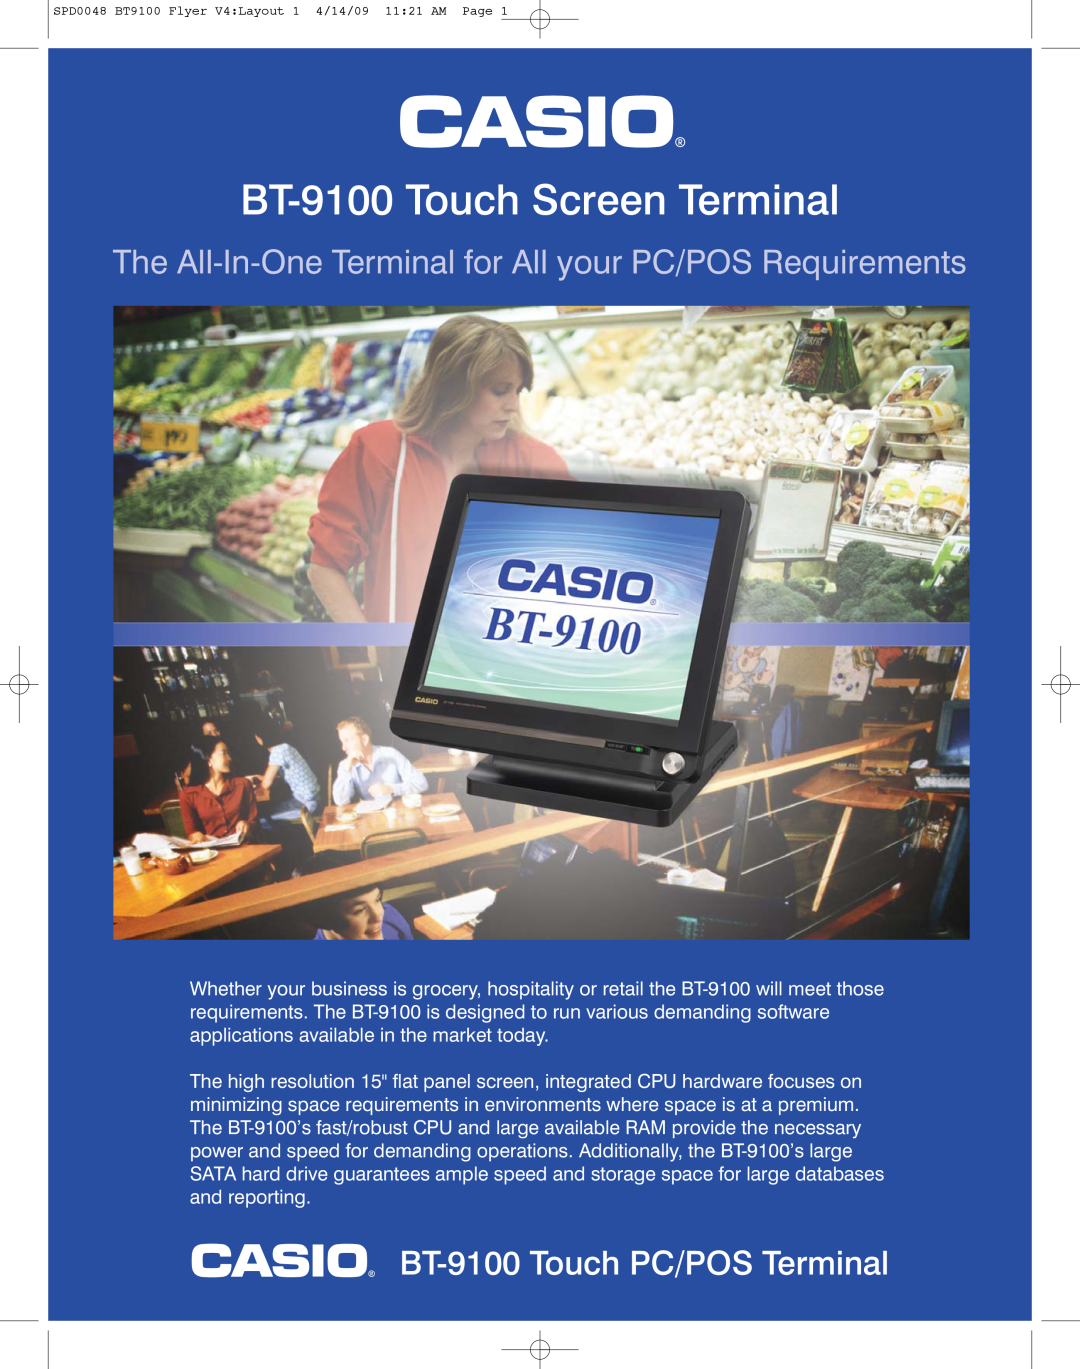 Casio manual BT-9100 Touch Screen Terminal, The All-In-One Terminal for All your PC/POS Requirements 